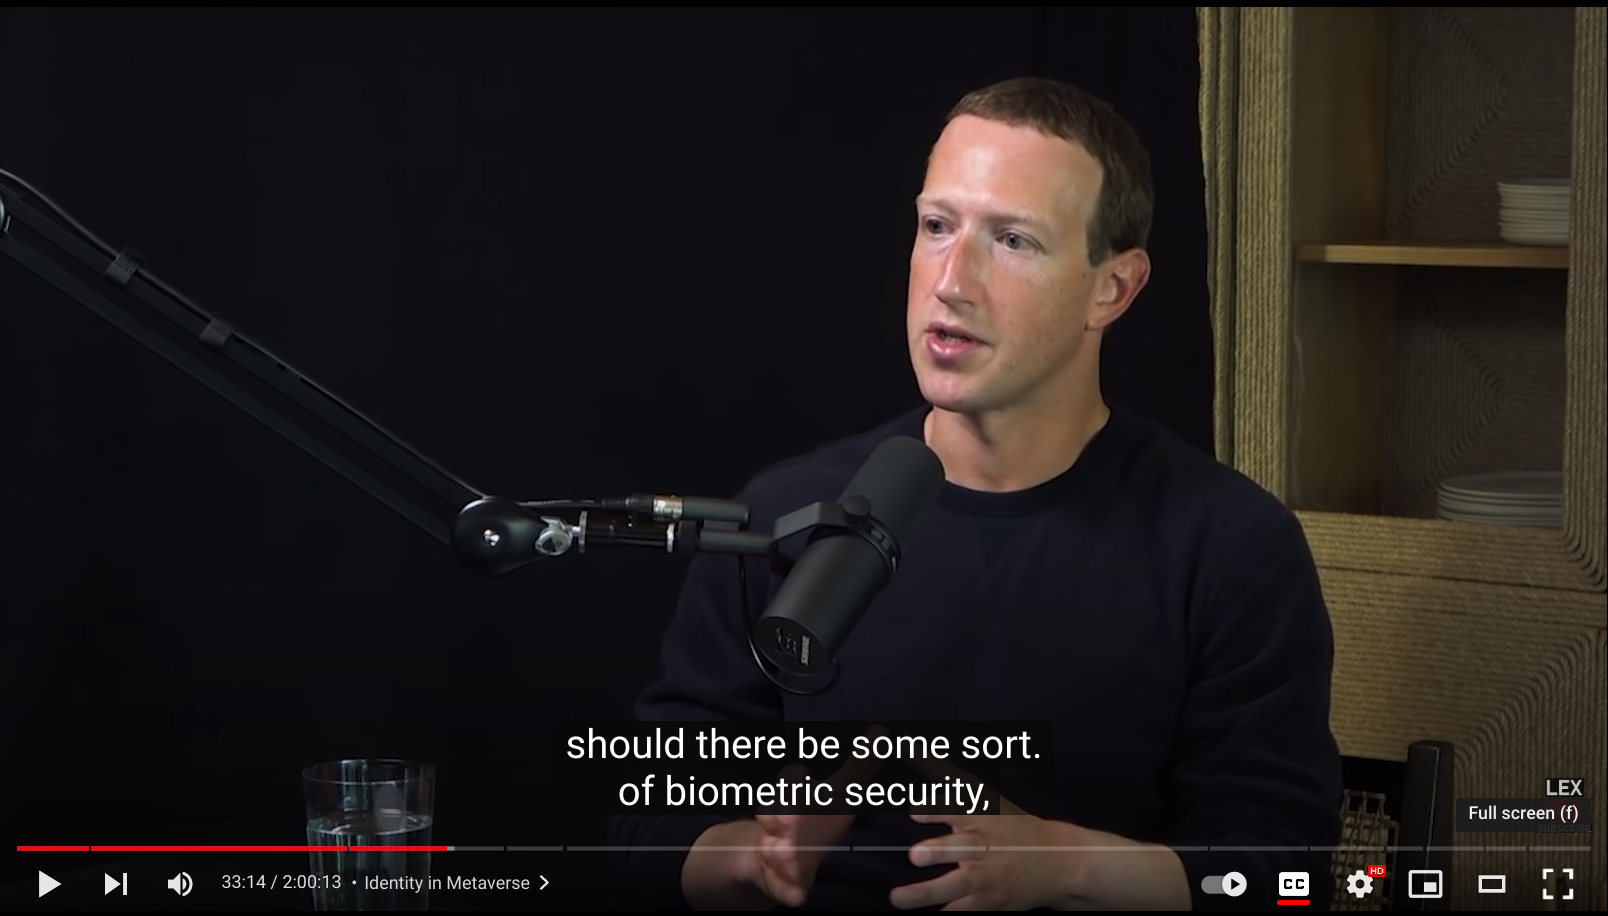 Mark Zuckerberg proposing biometrics as a possible solution to impersonation and fake accounts